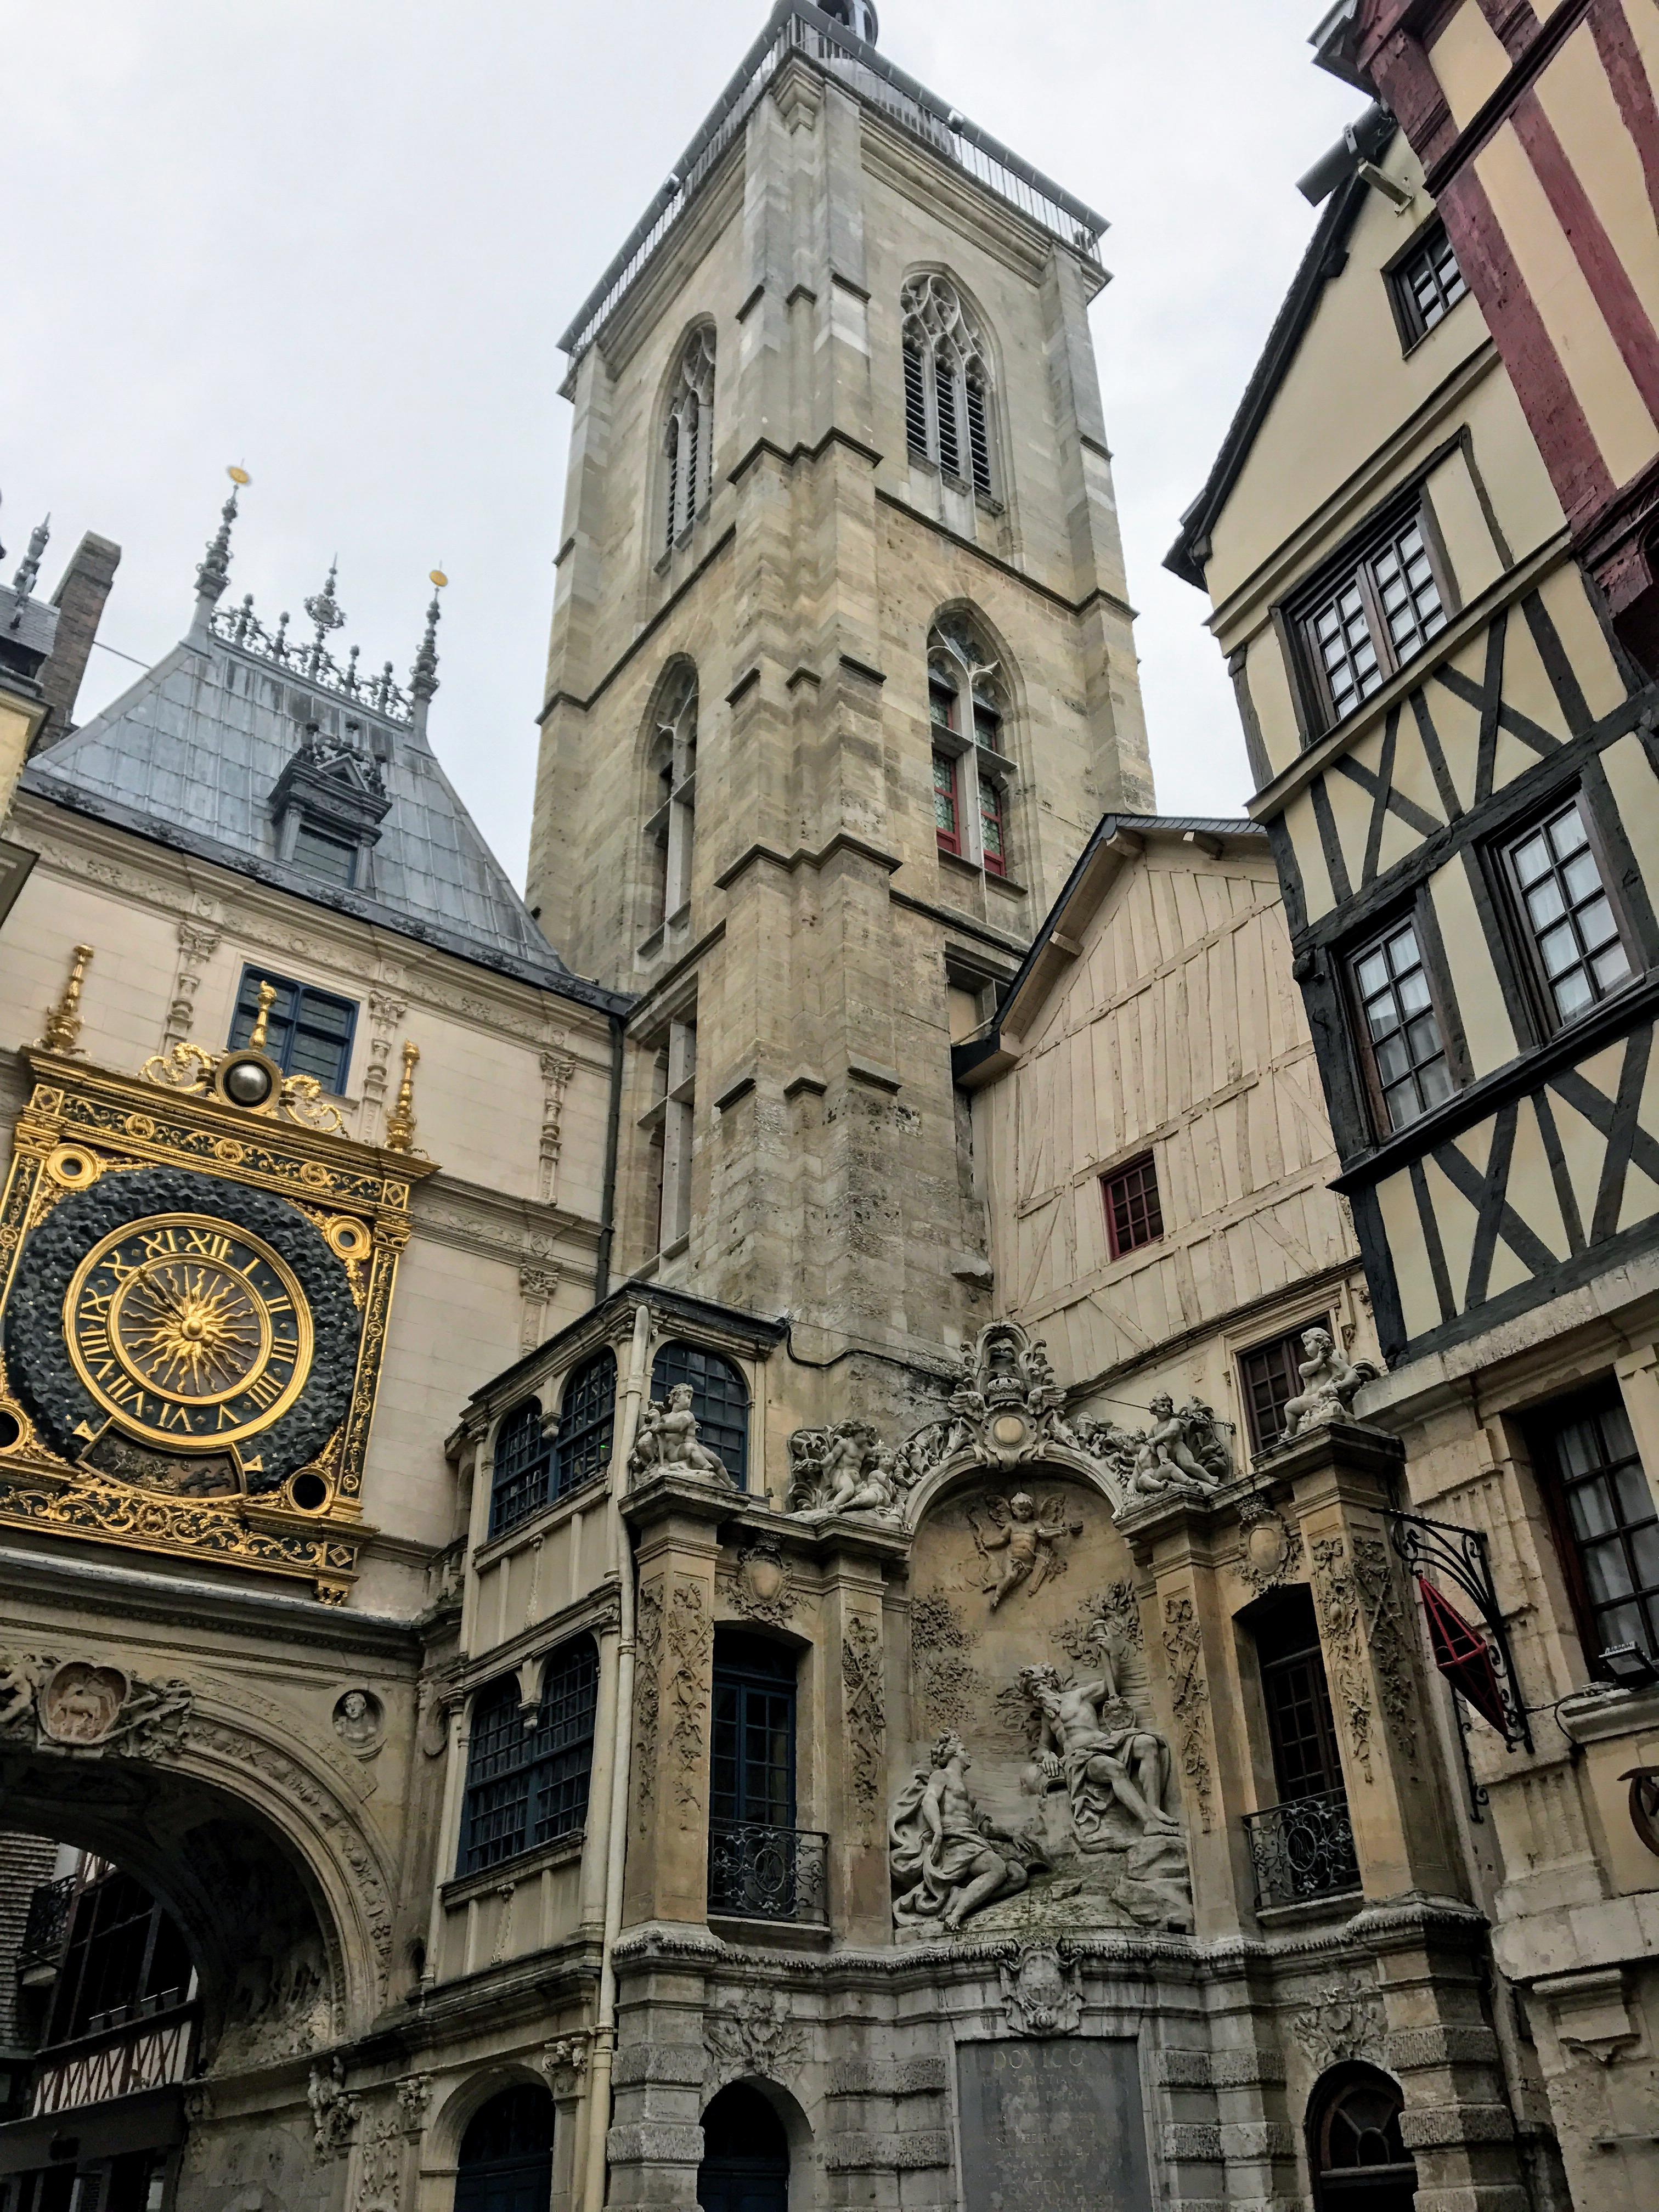 A Mystical Day in Rouen, France